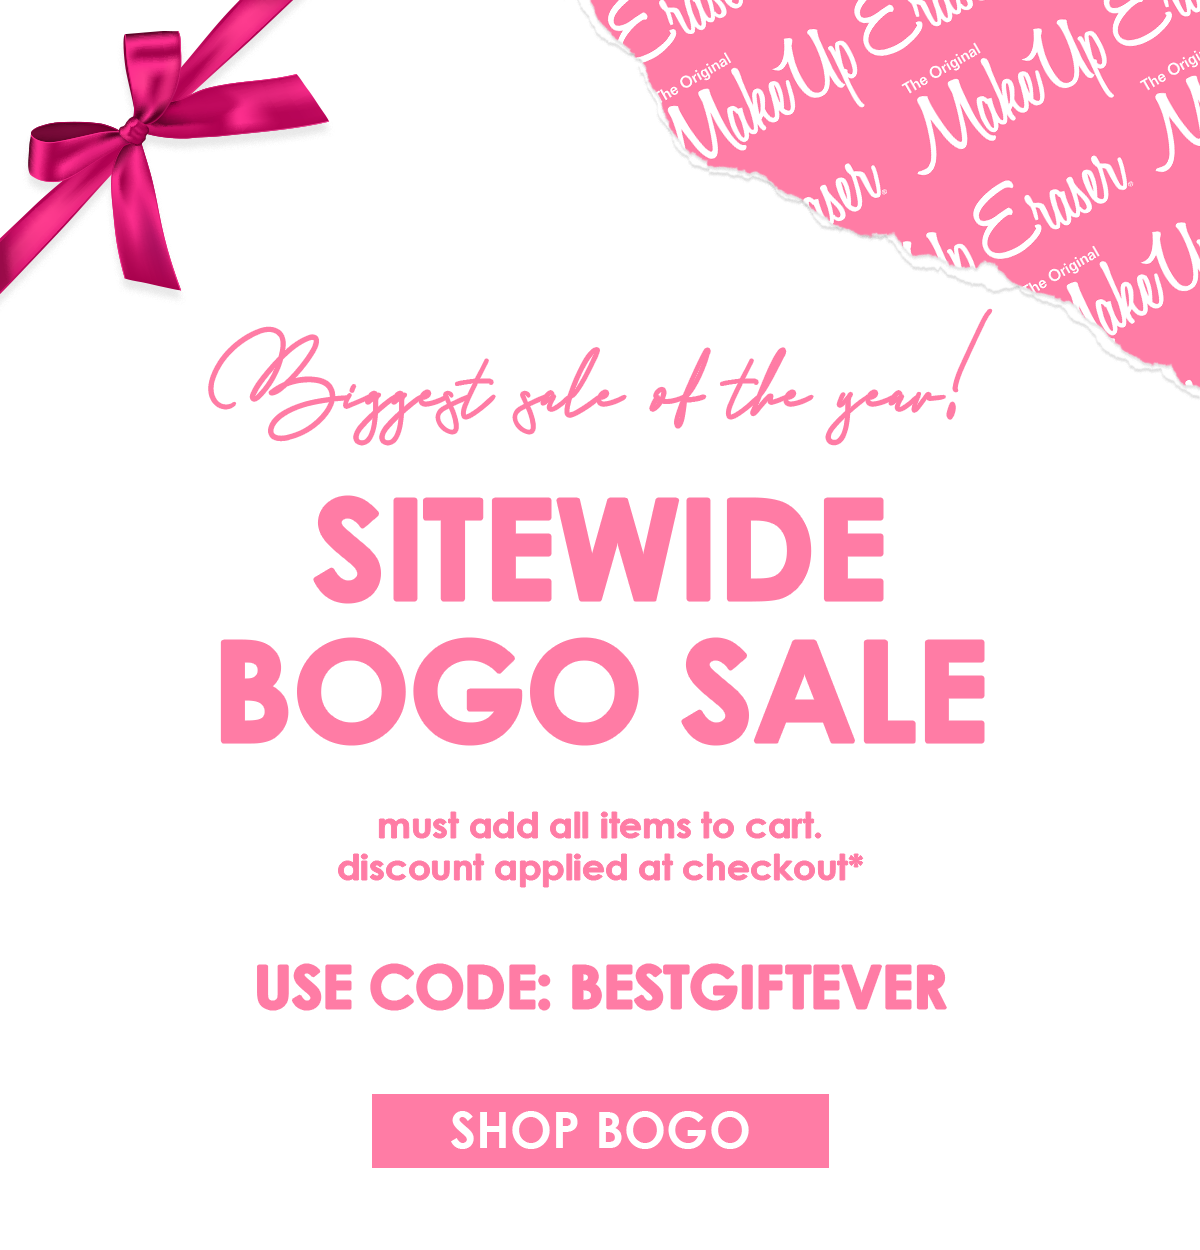 BUY 1 GET 1 FREE SITEWIDE